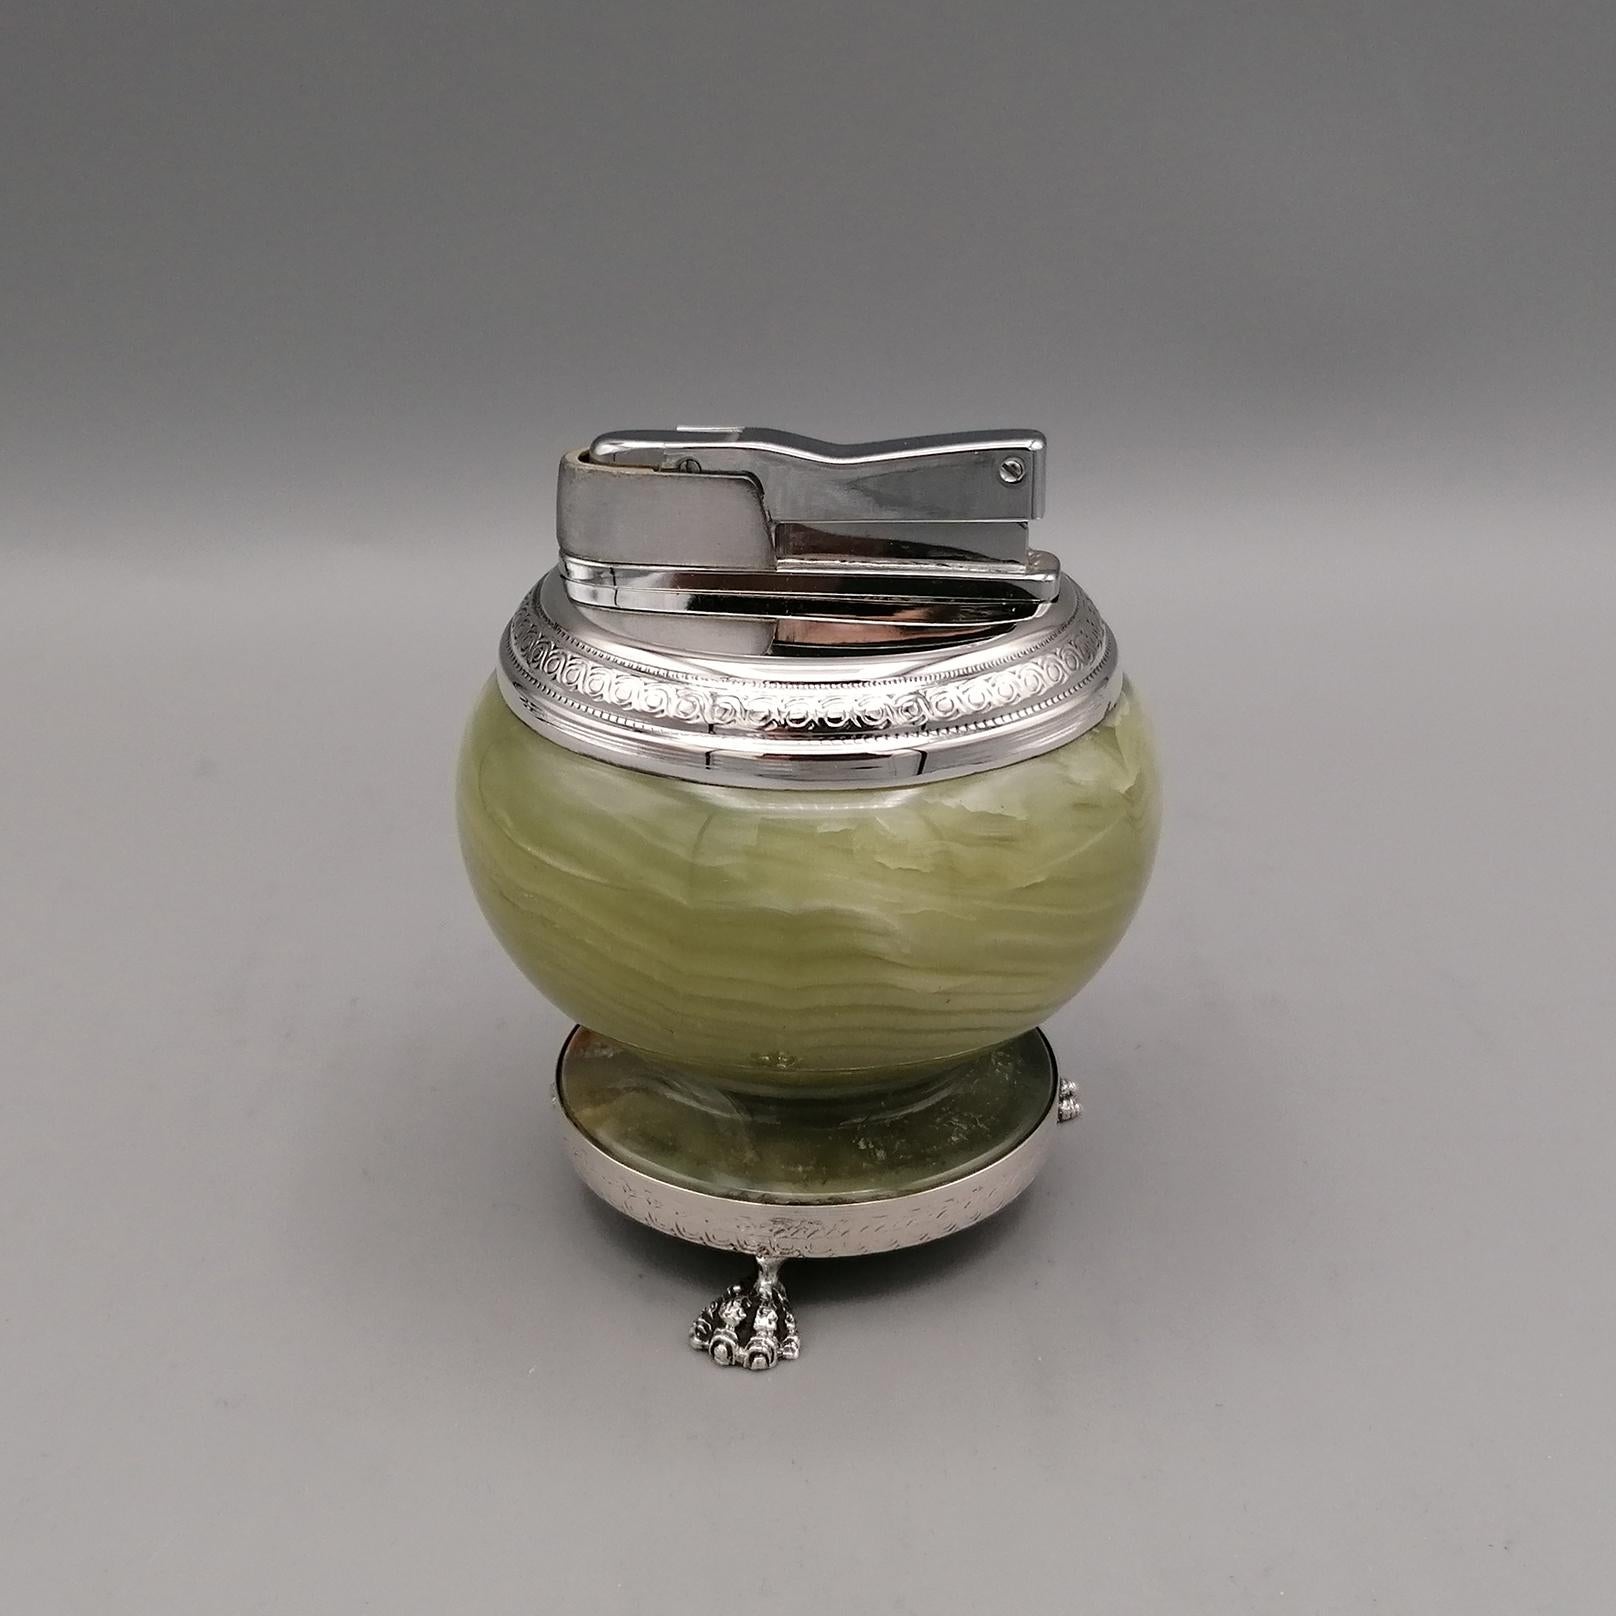 Lighter made in Italy in the late 60s. 
The body is round and in cerde onyx with yellow ocher details.
The base is a smooth ring with a silver frame supported by 3 feet with a bird of prey paw design.
The upper part is always in smooth silver with a